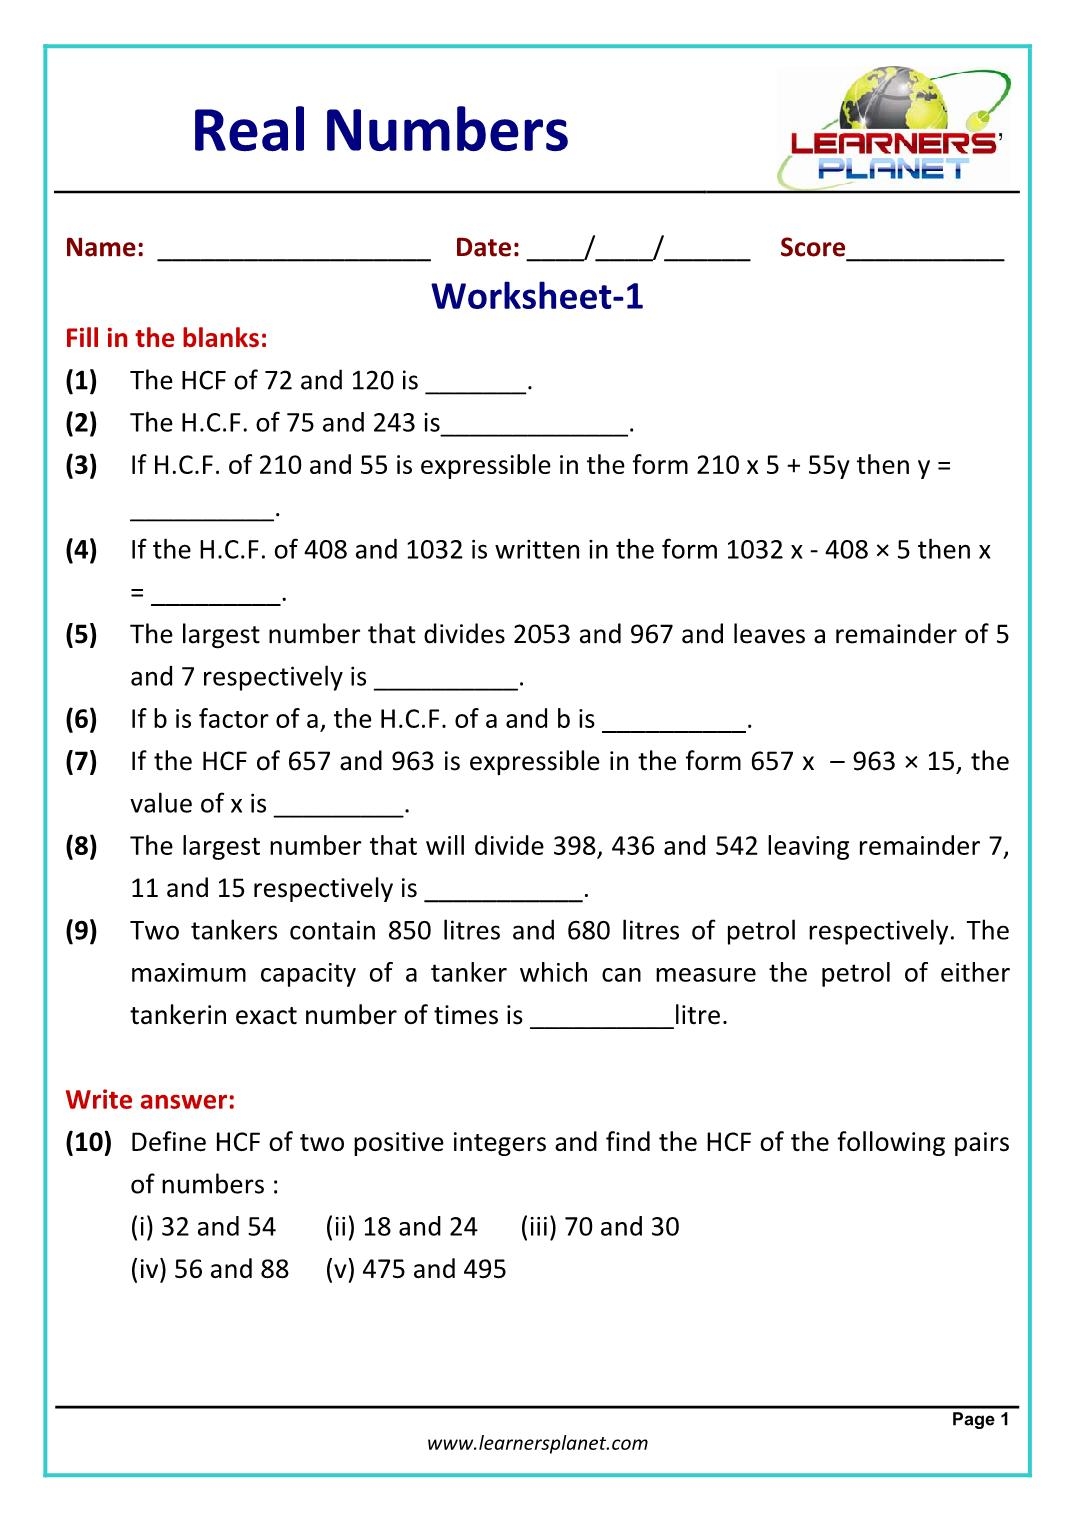 cbse-class-x-mathematics-real-numbers-worksheets-math-worksheet-answers